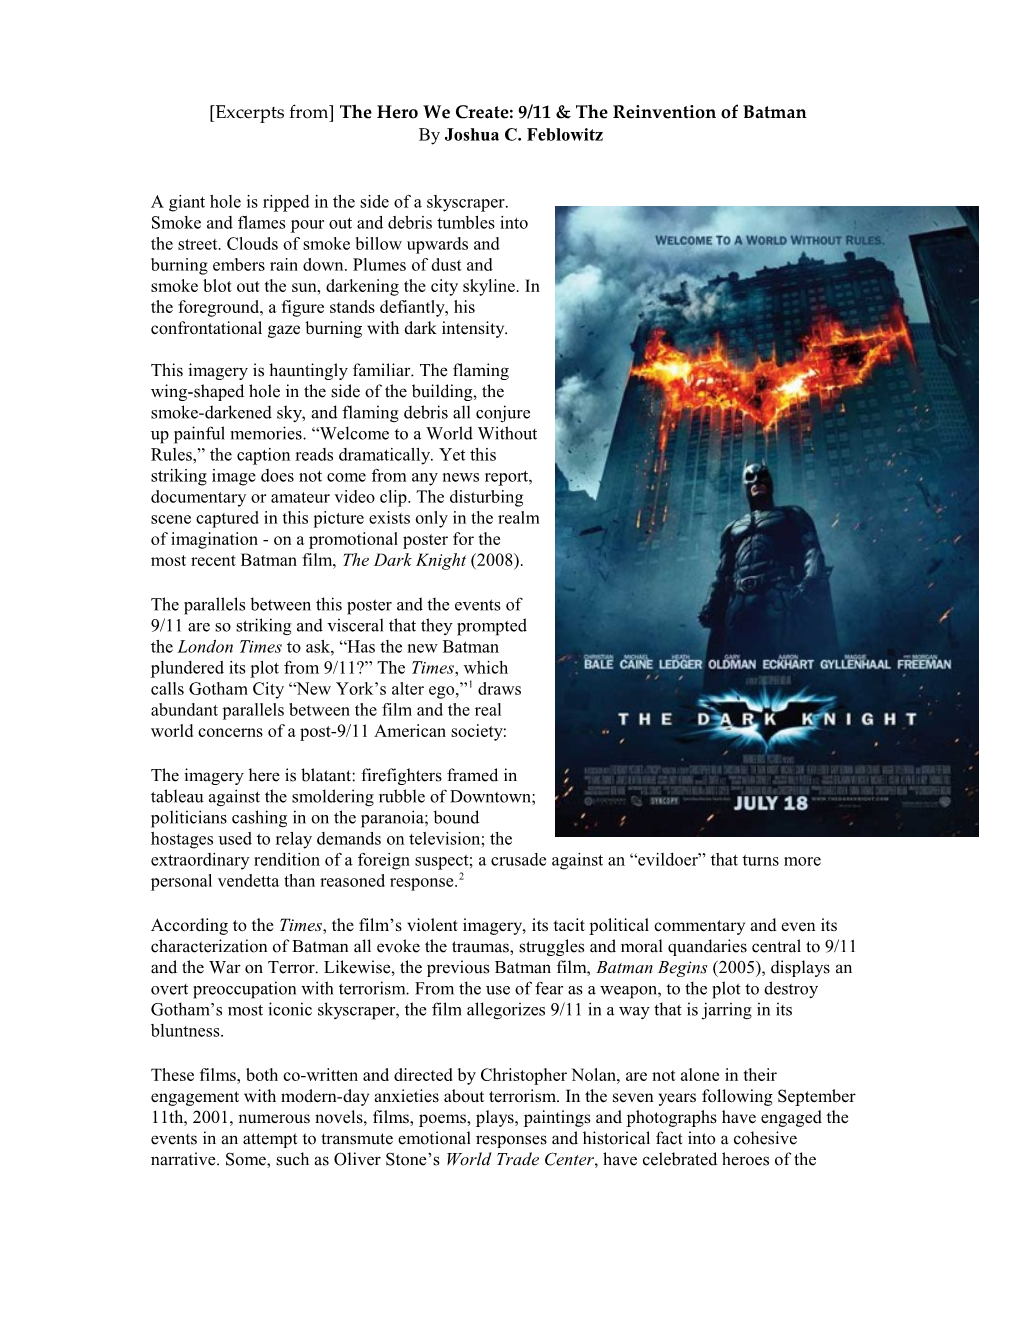 Excerpts from the Hero We Create: 9/11 & the Reinvention of Batman